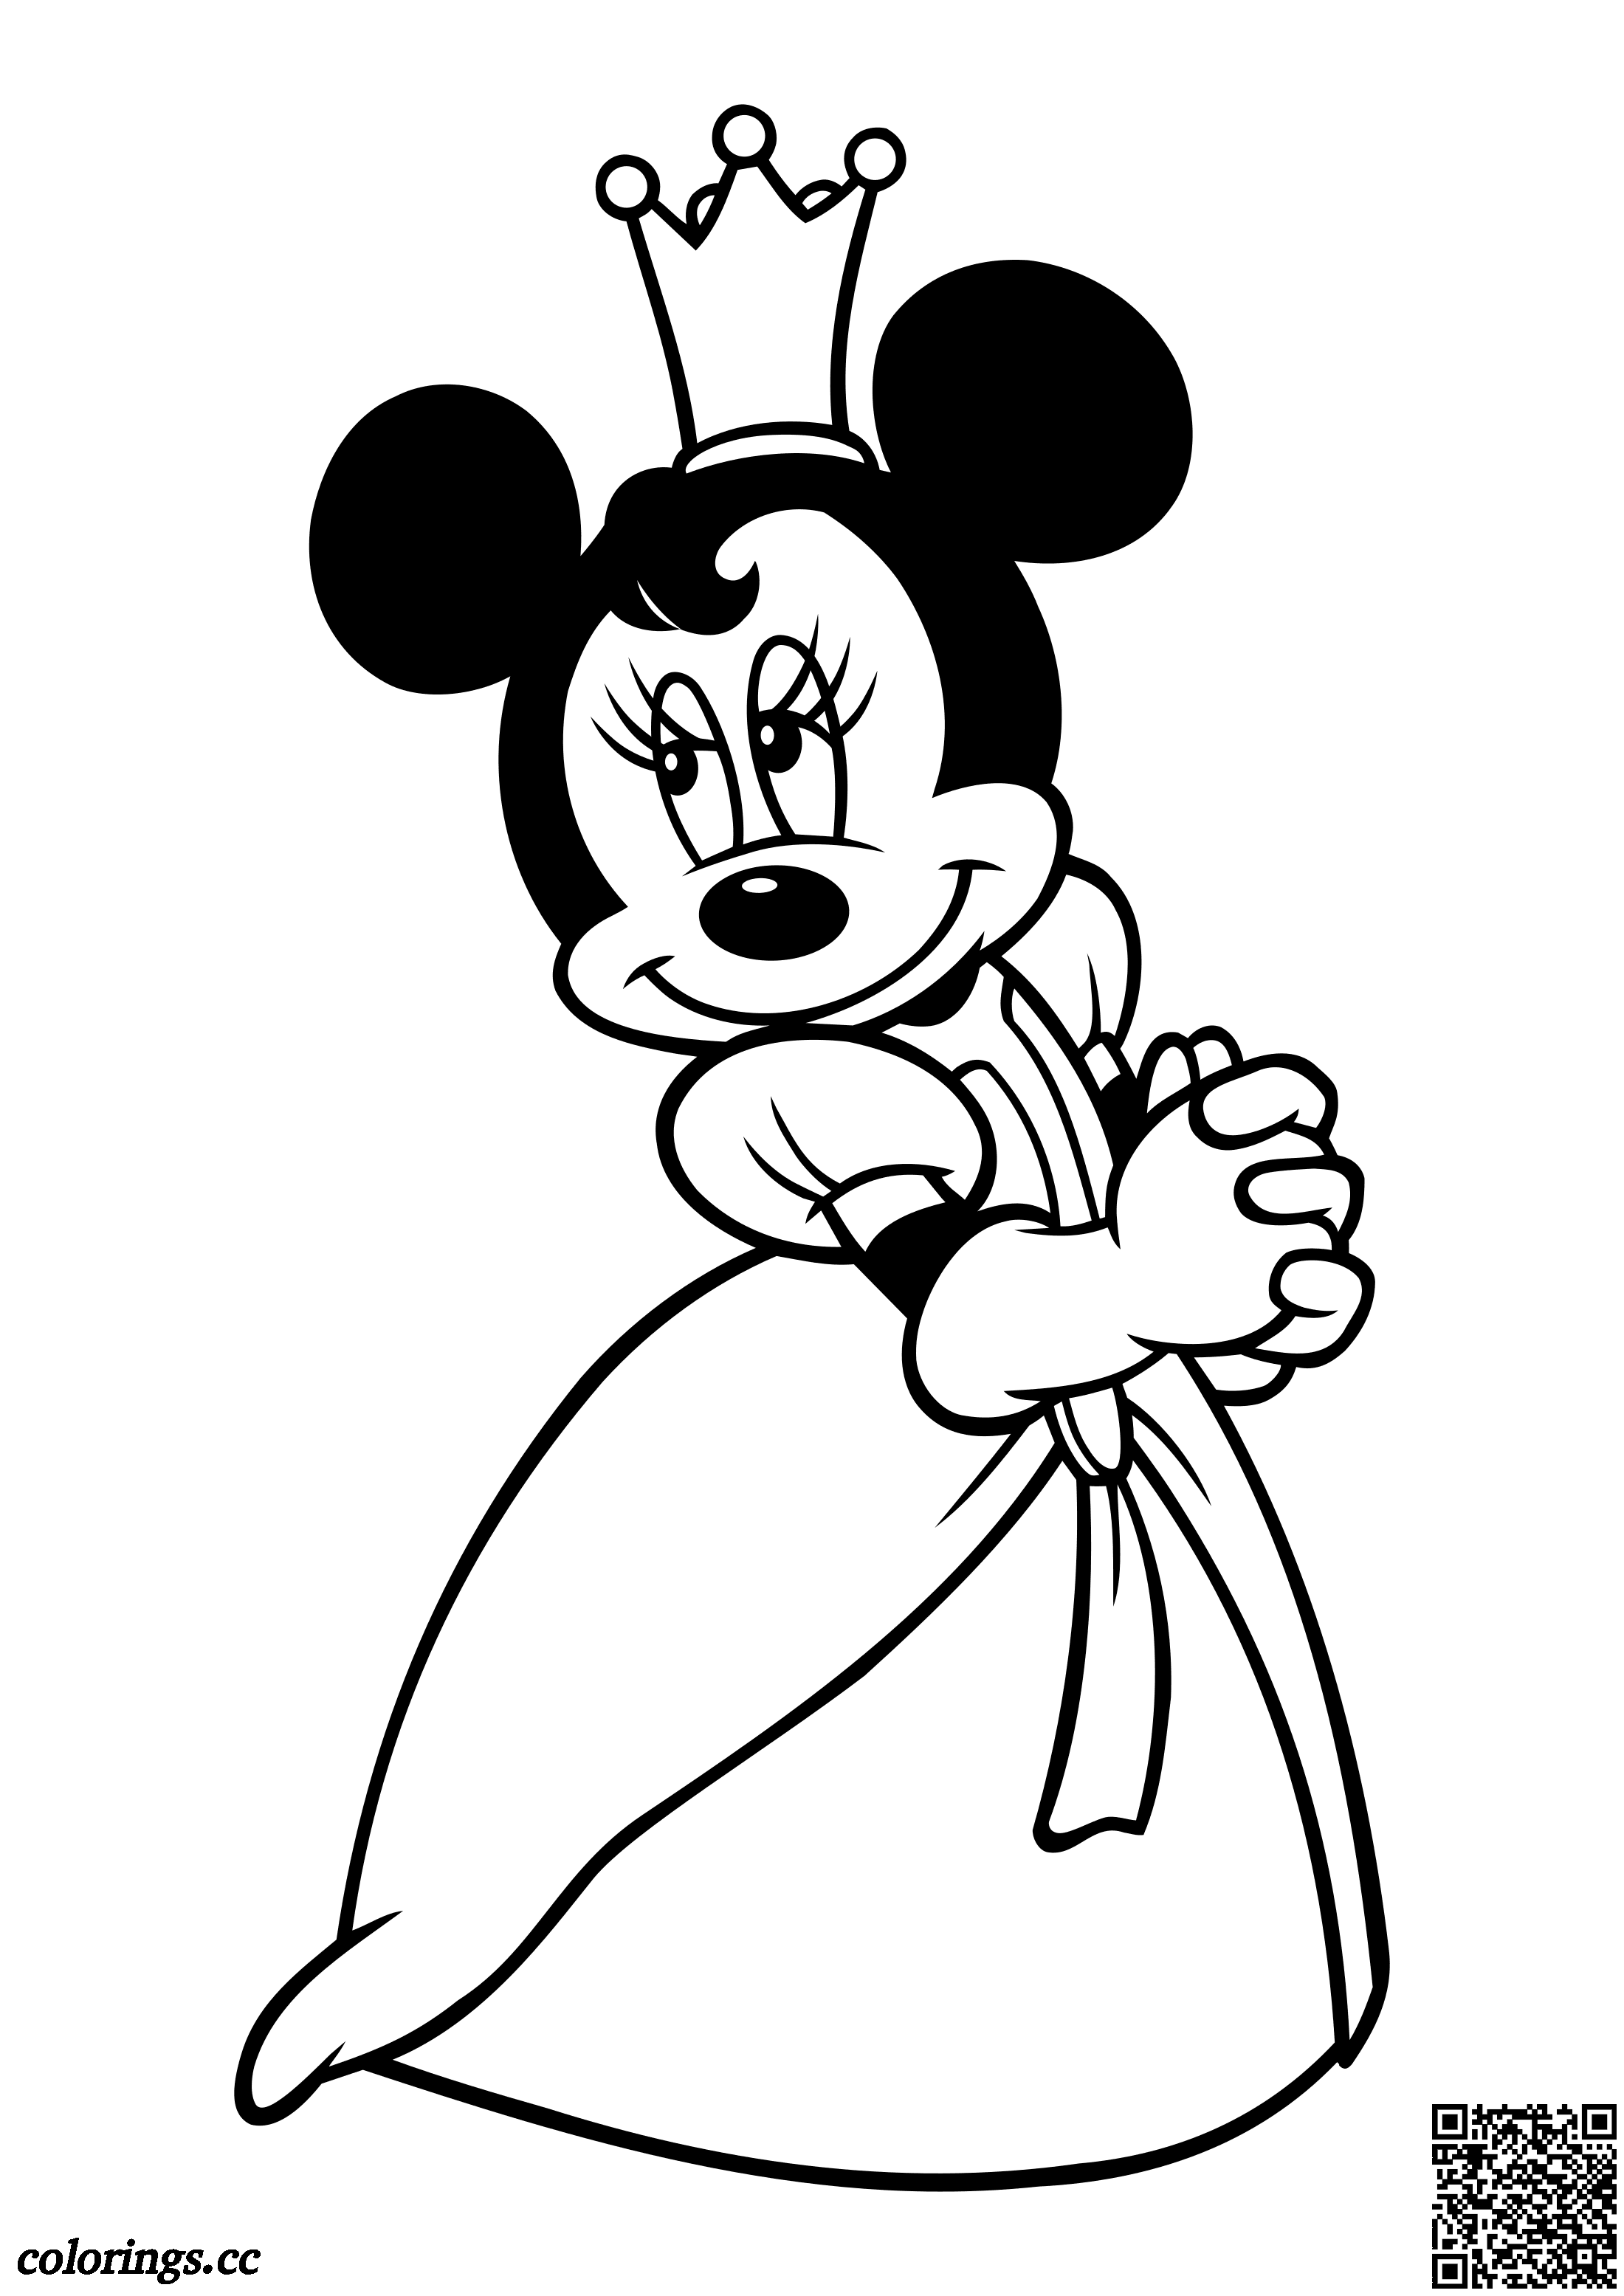 Minnie Mouse - Princess of France coloring pages, Mickey Mouse Club